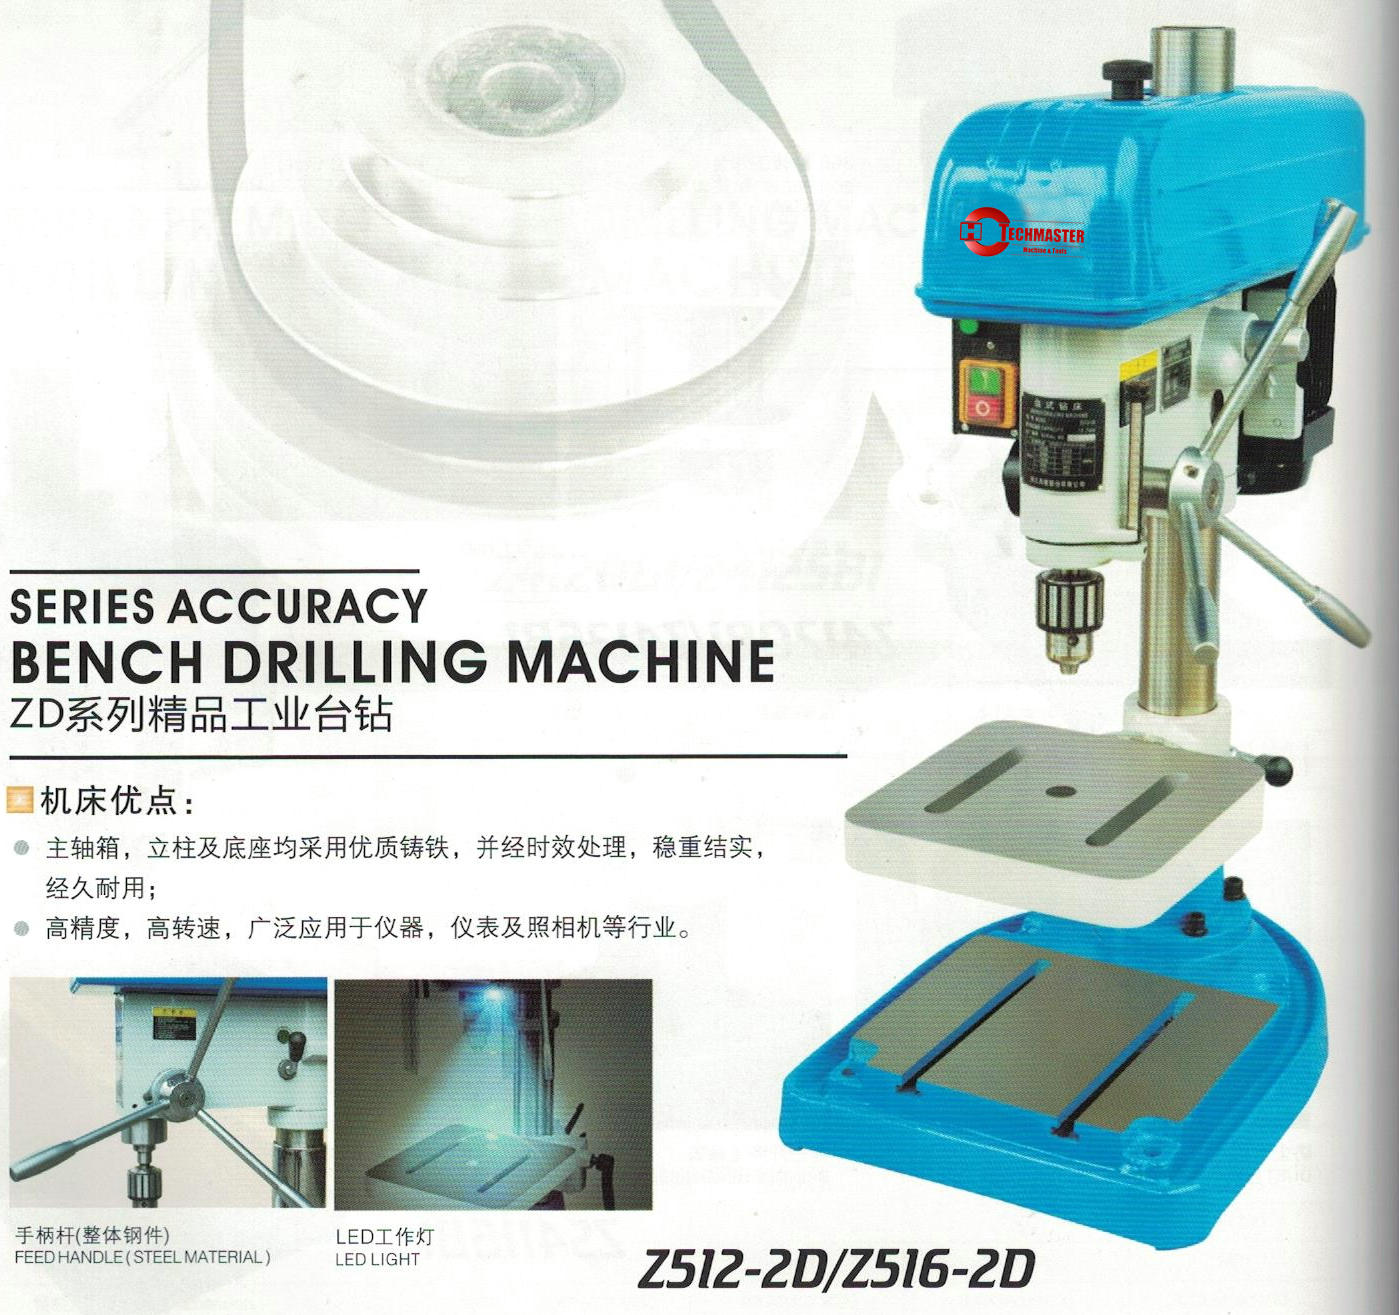 ZD SERIES ACCURACY BENCH DRILLING MACHINE Z4125D